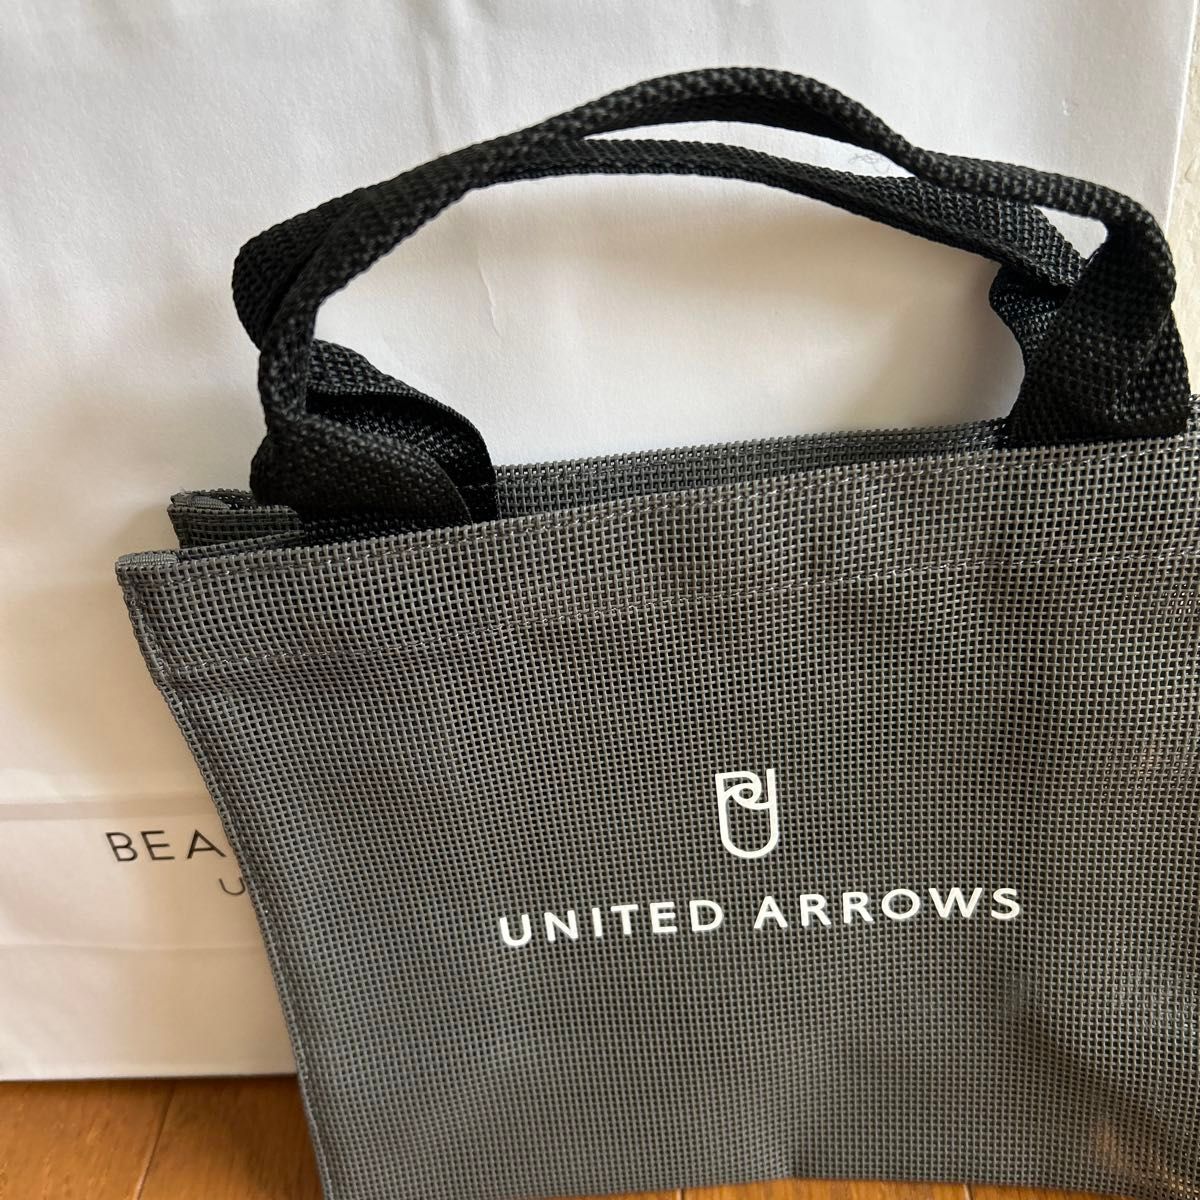 UNITED ARROWS メッシュトートバッグ